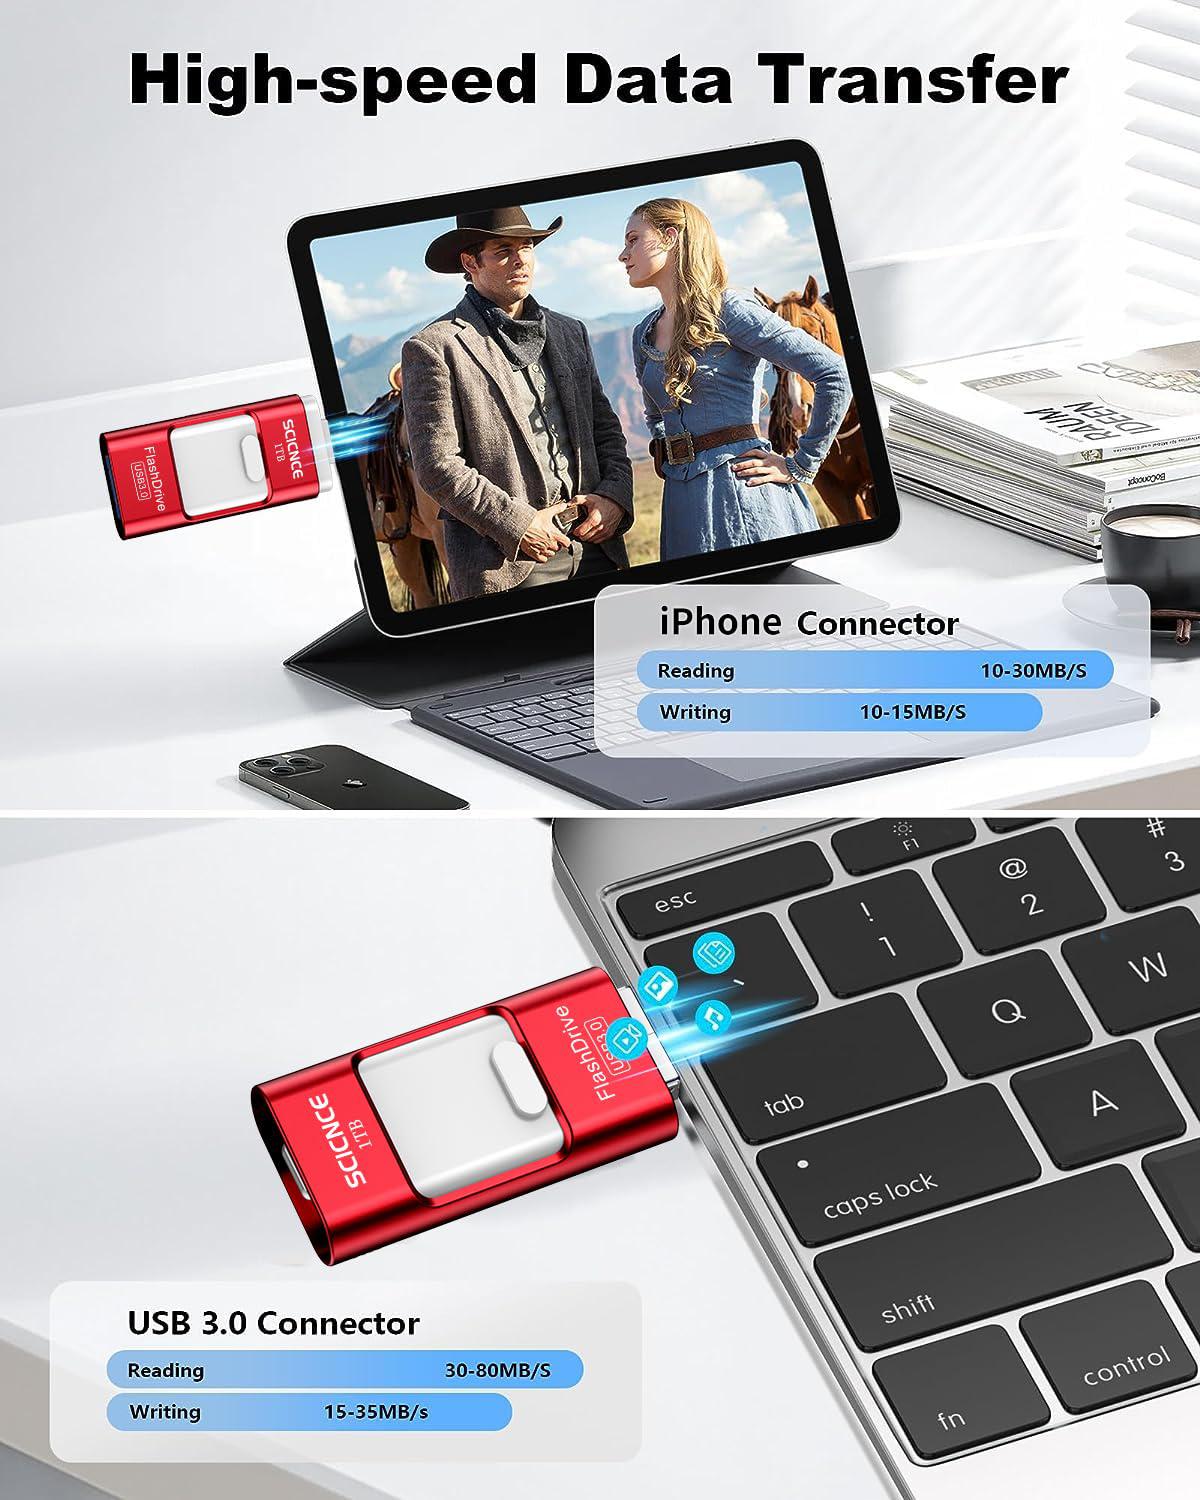 SCICNCE RNAB0CFHT2W4V scicnce 1tb photo stick for iphone flash drive, usb  memory stick thumb drive external storage compatible with iphone ipad and